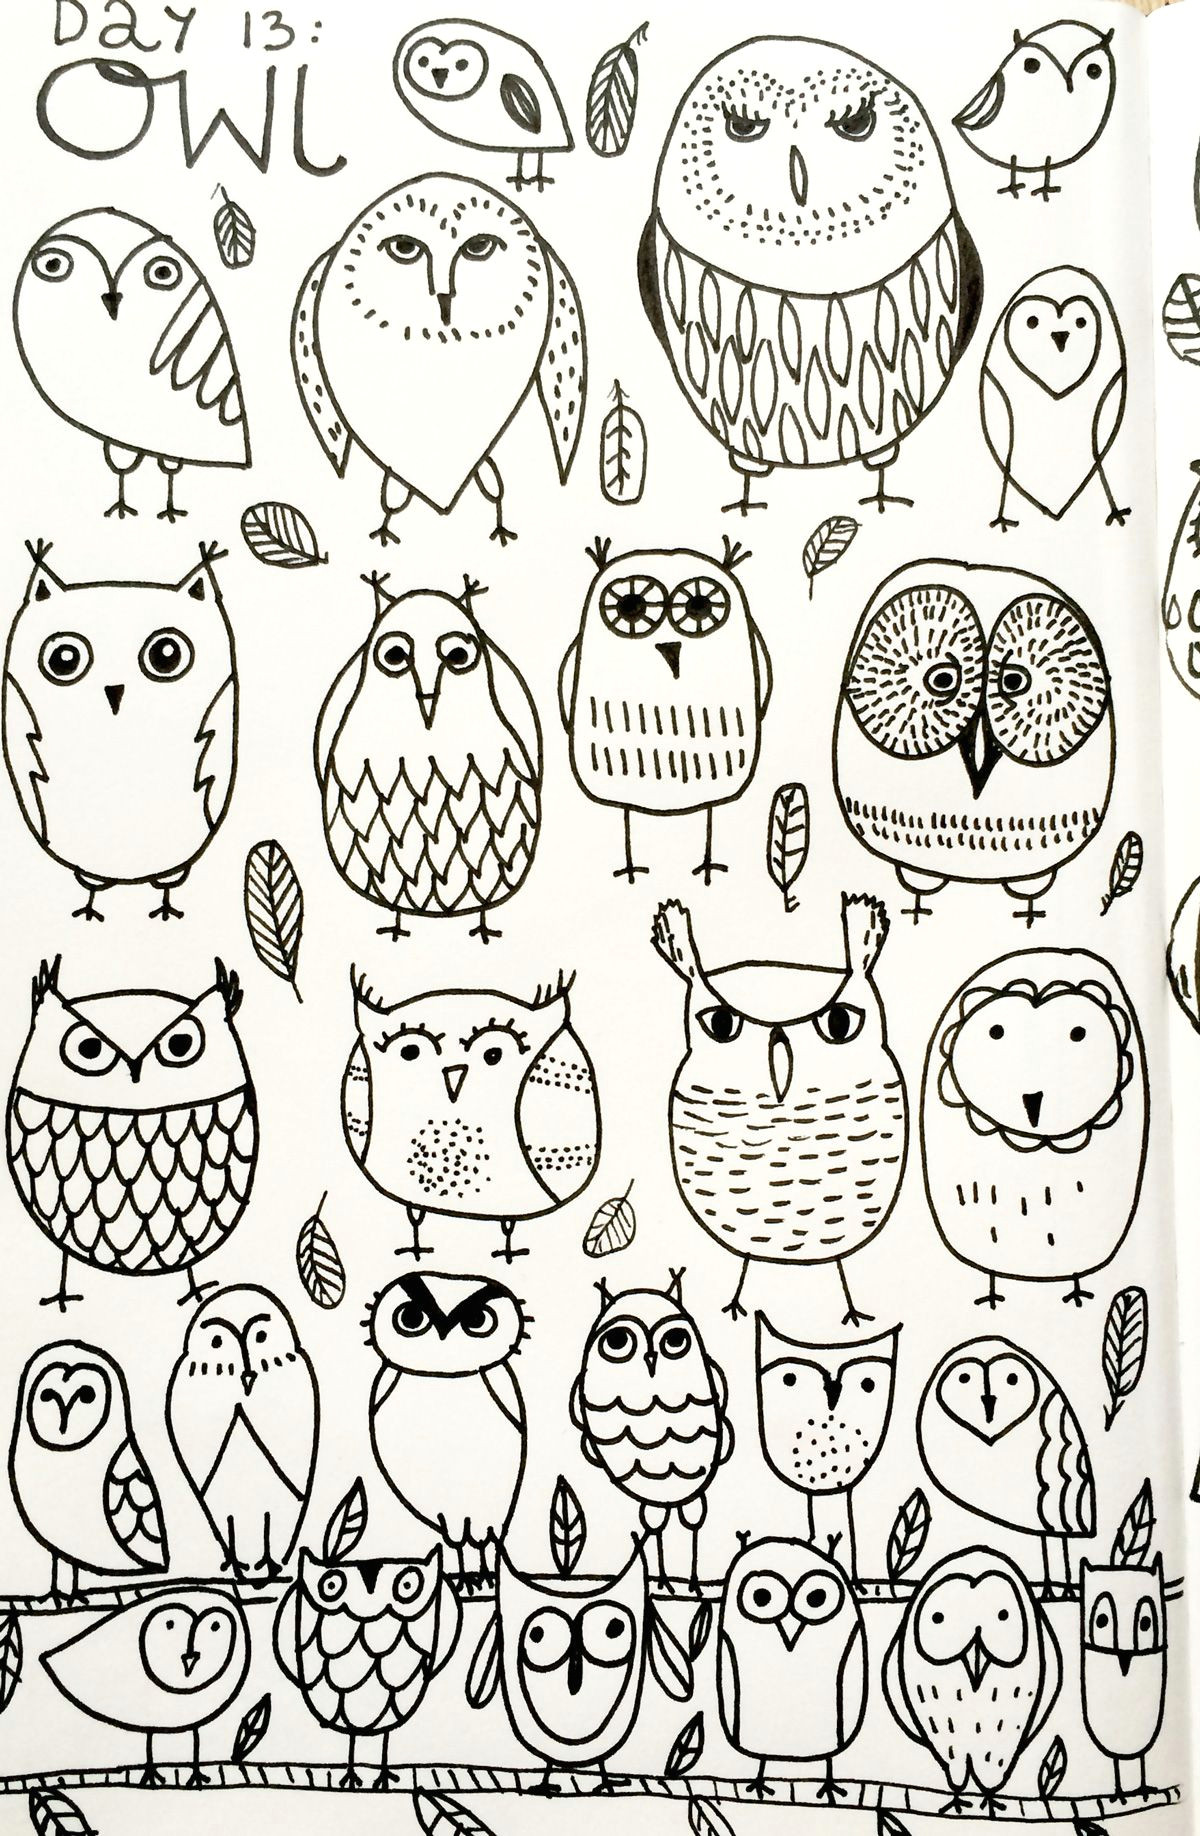 Drawing Ideas for January Monthly Sketchbook Challenge January 2016 Day 13 Owl Journal